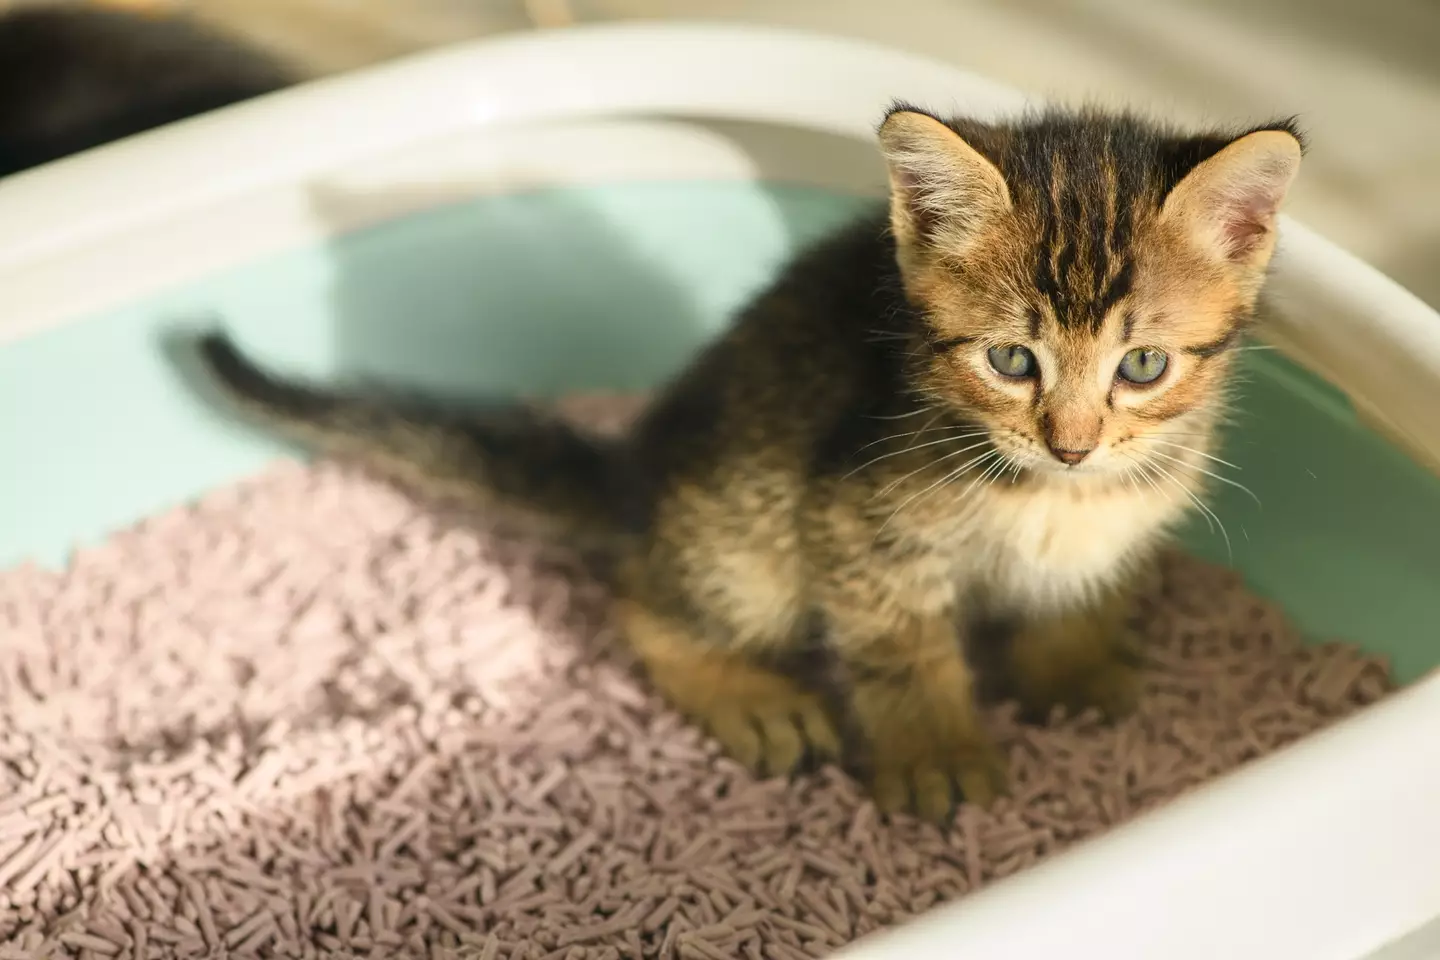 Pets need to stick to their own toilets!